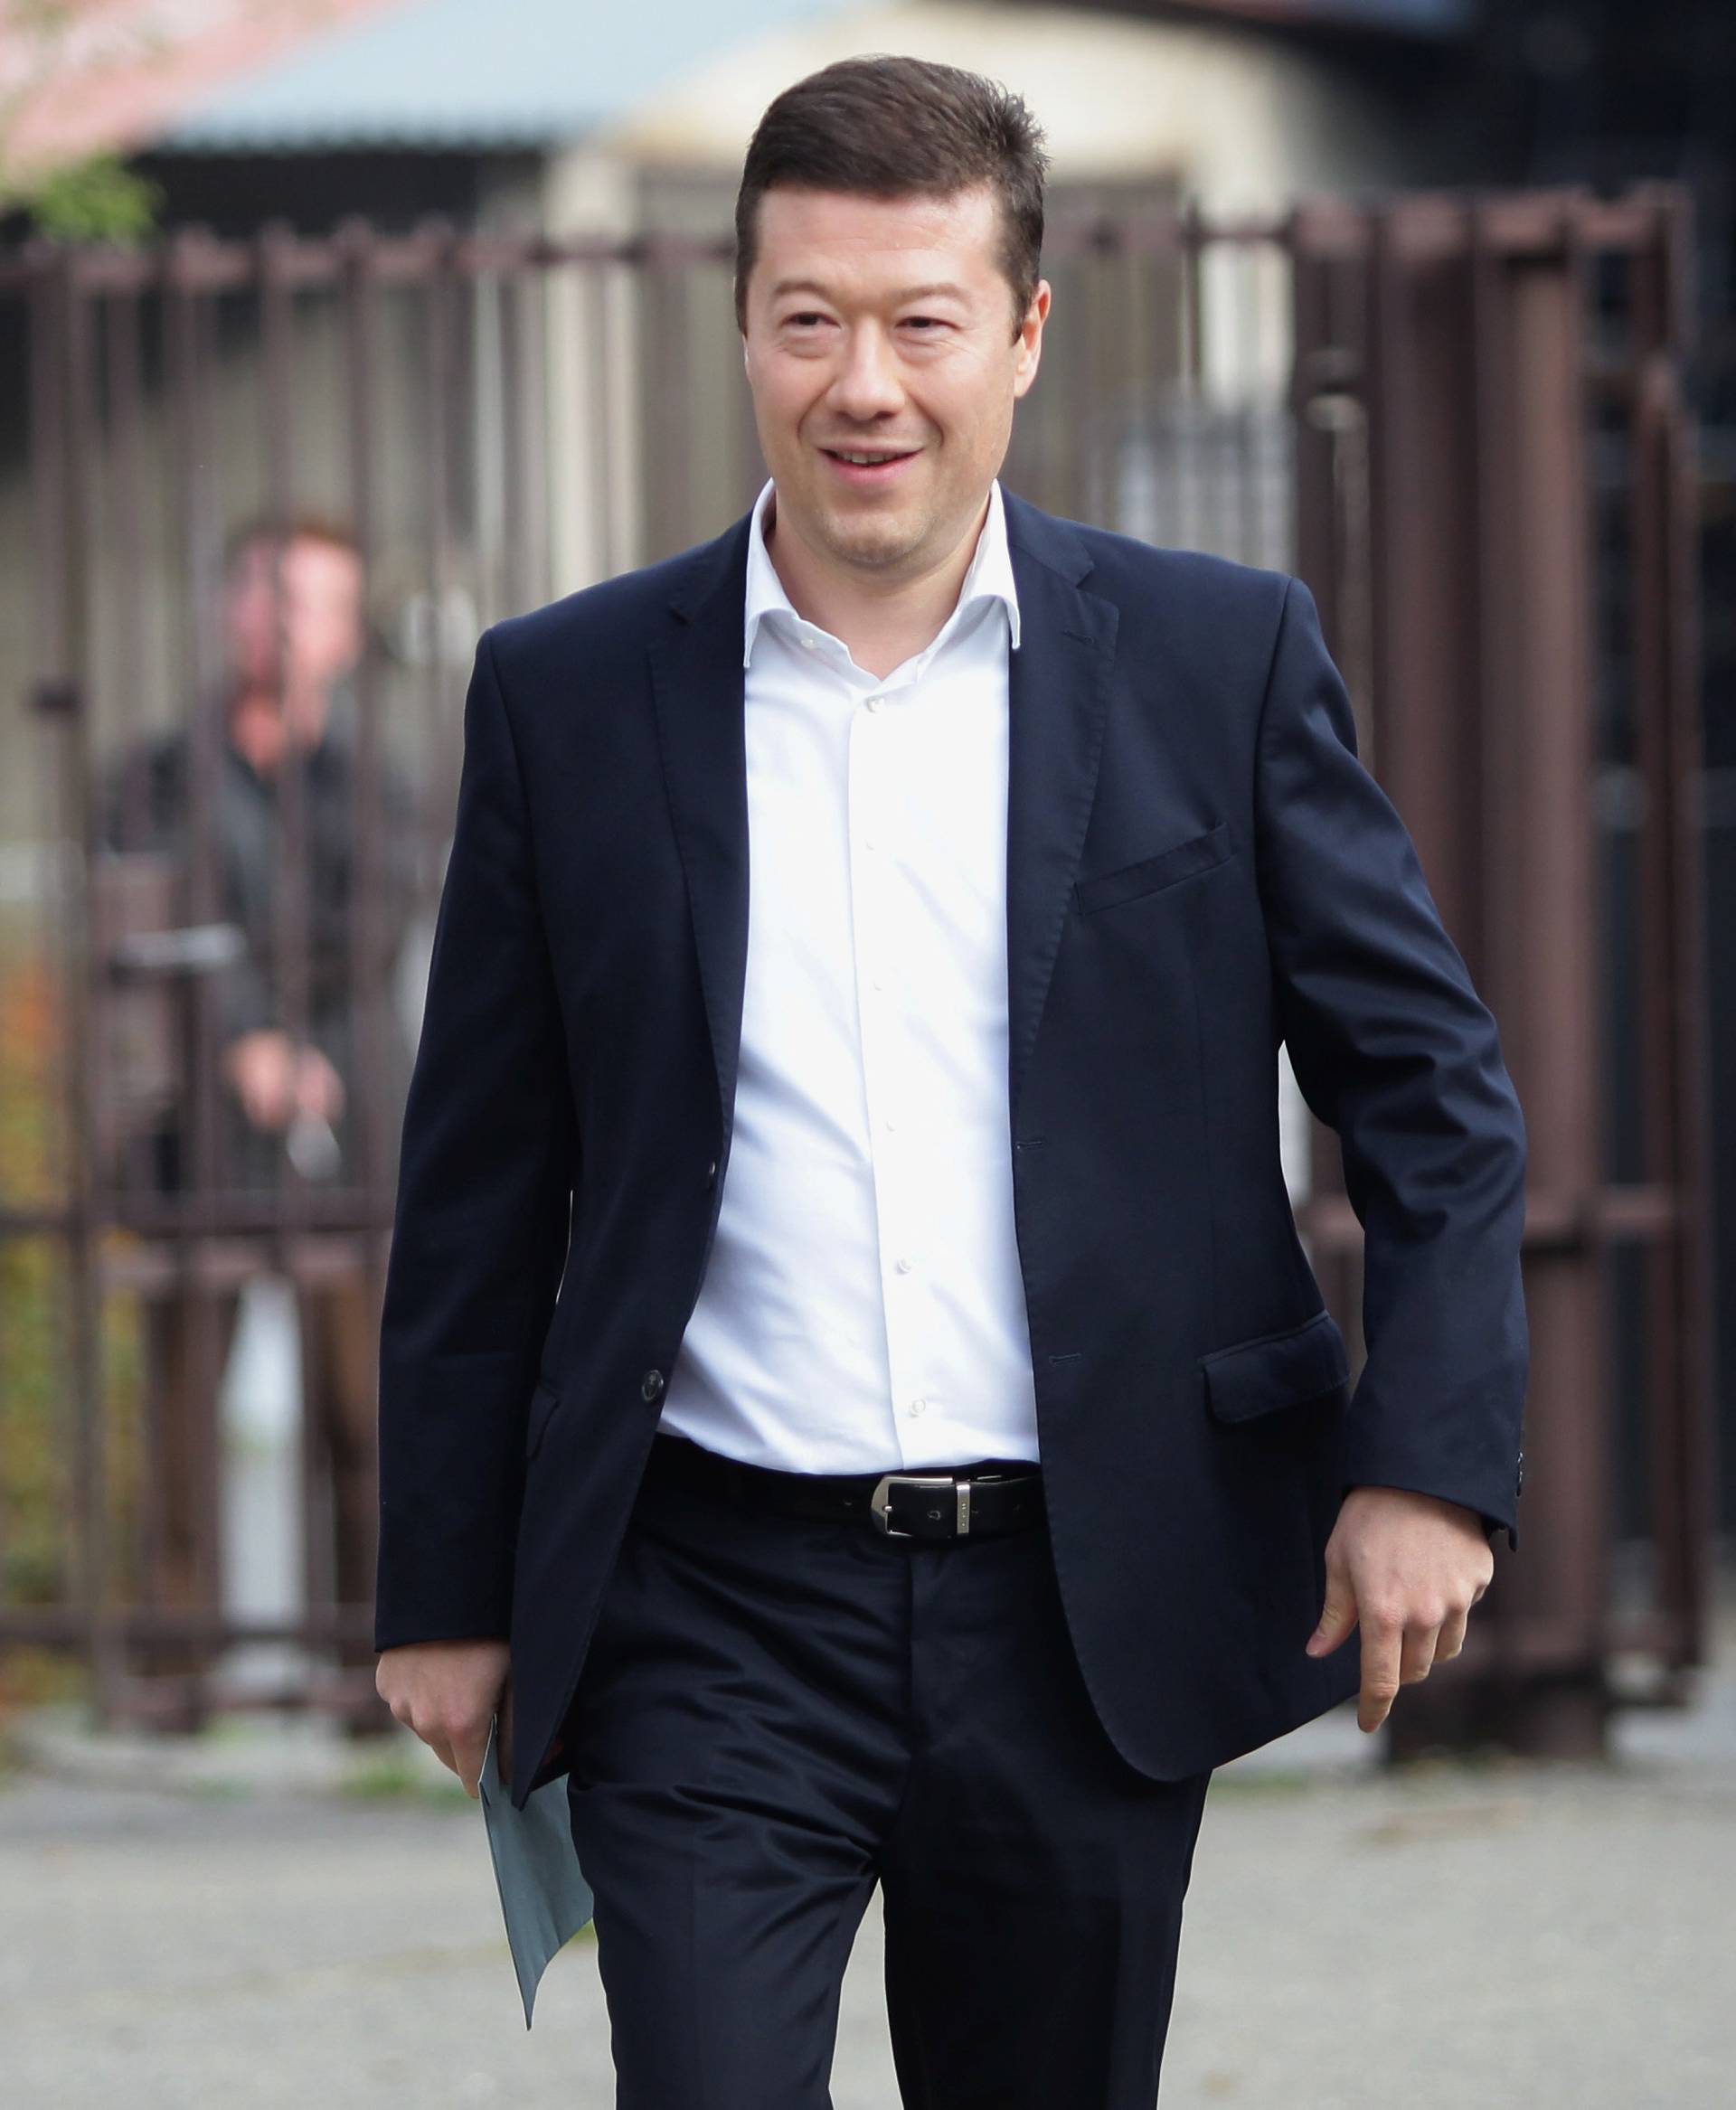 The leader of Freedom and Direct Democracy (SPD) party Tomio Okamura arrives to cast his vote in parliamentary election in Prague